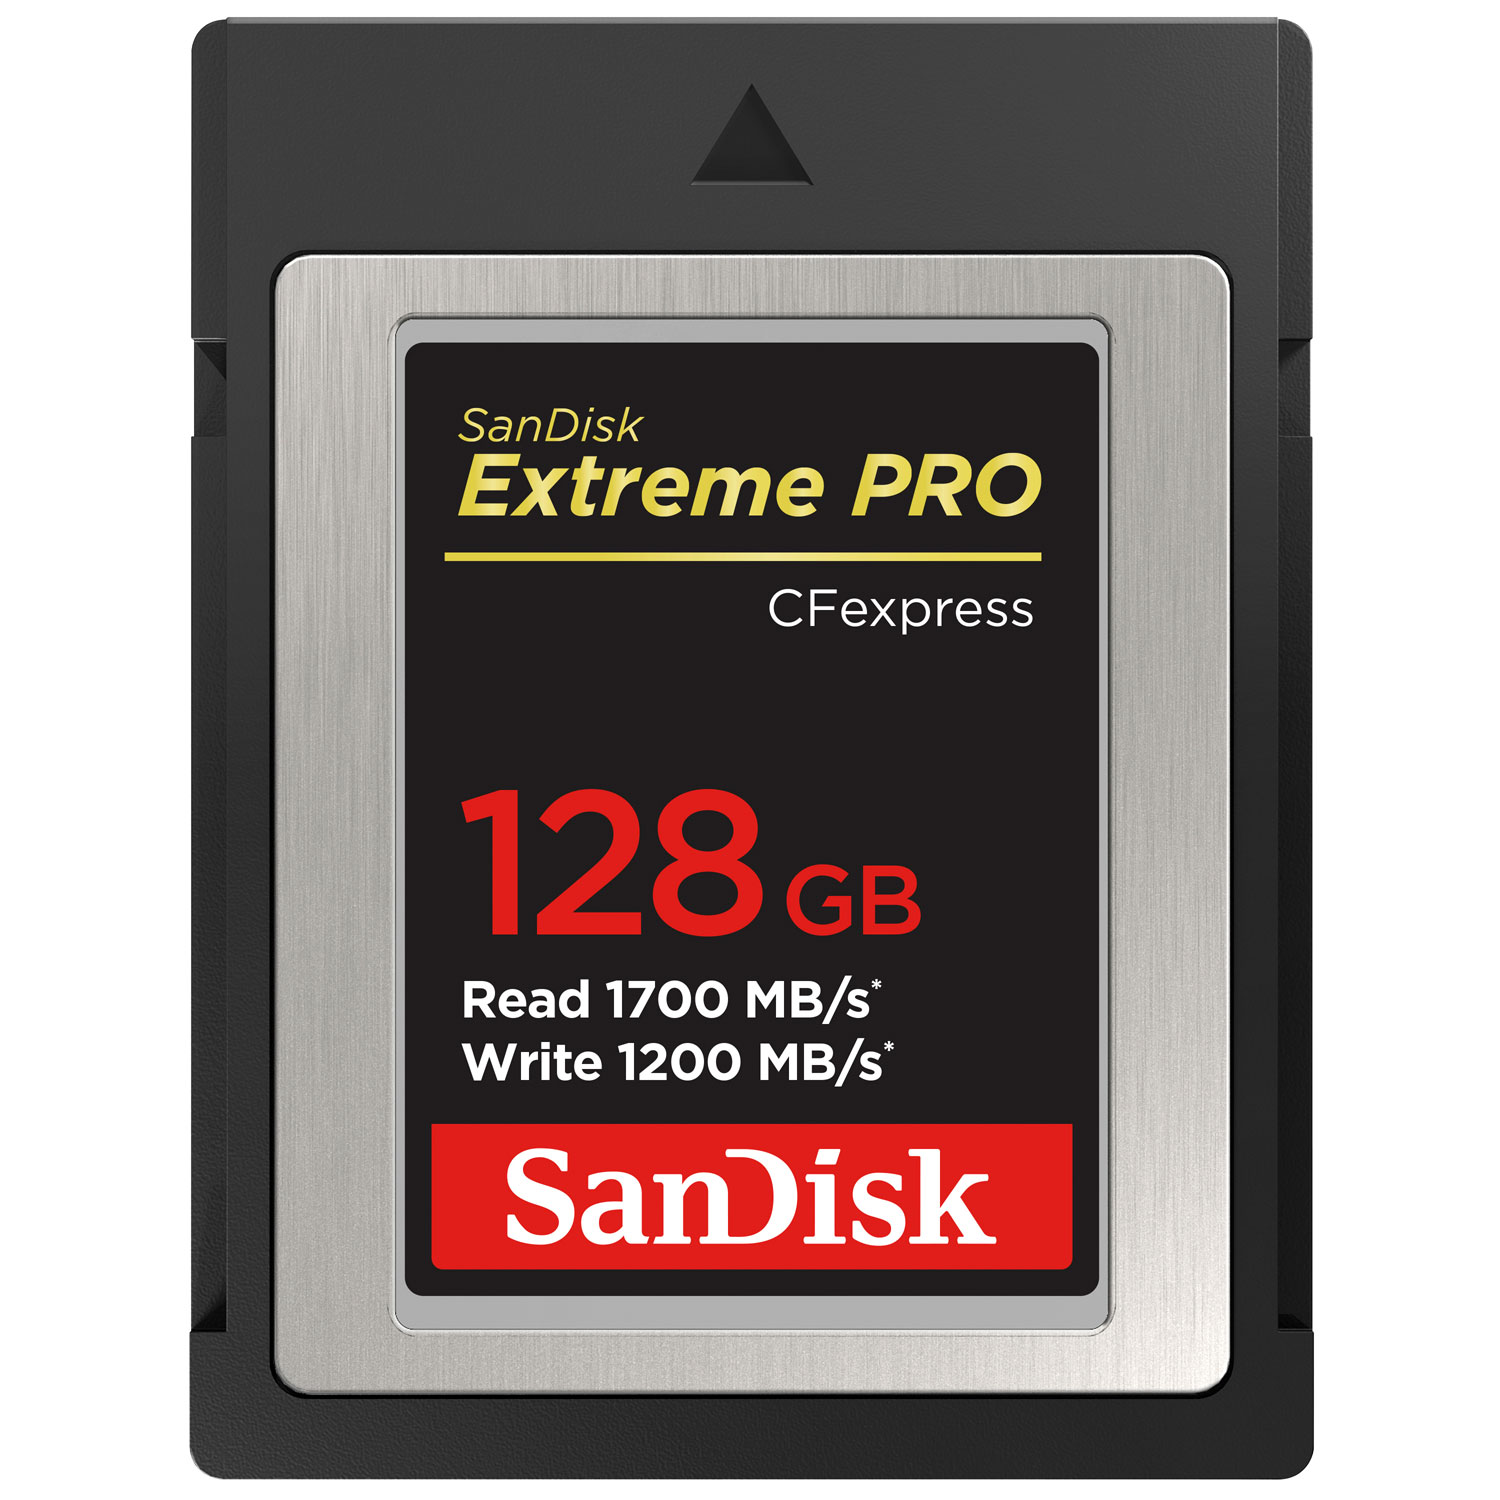 SanDisk Extreme Pro 128GB 1700MB/s CFexpress Memory Card